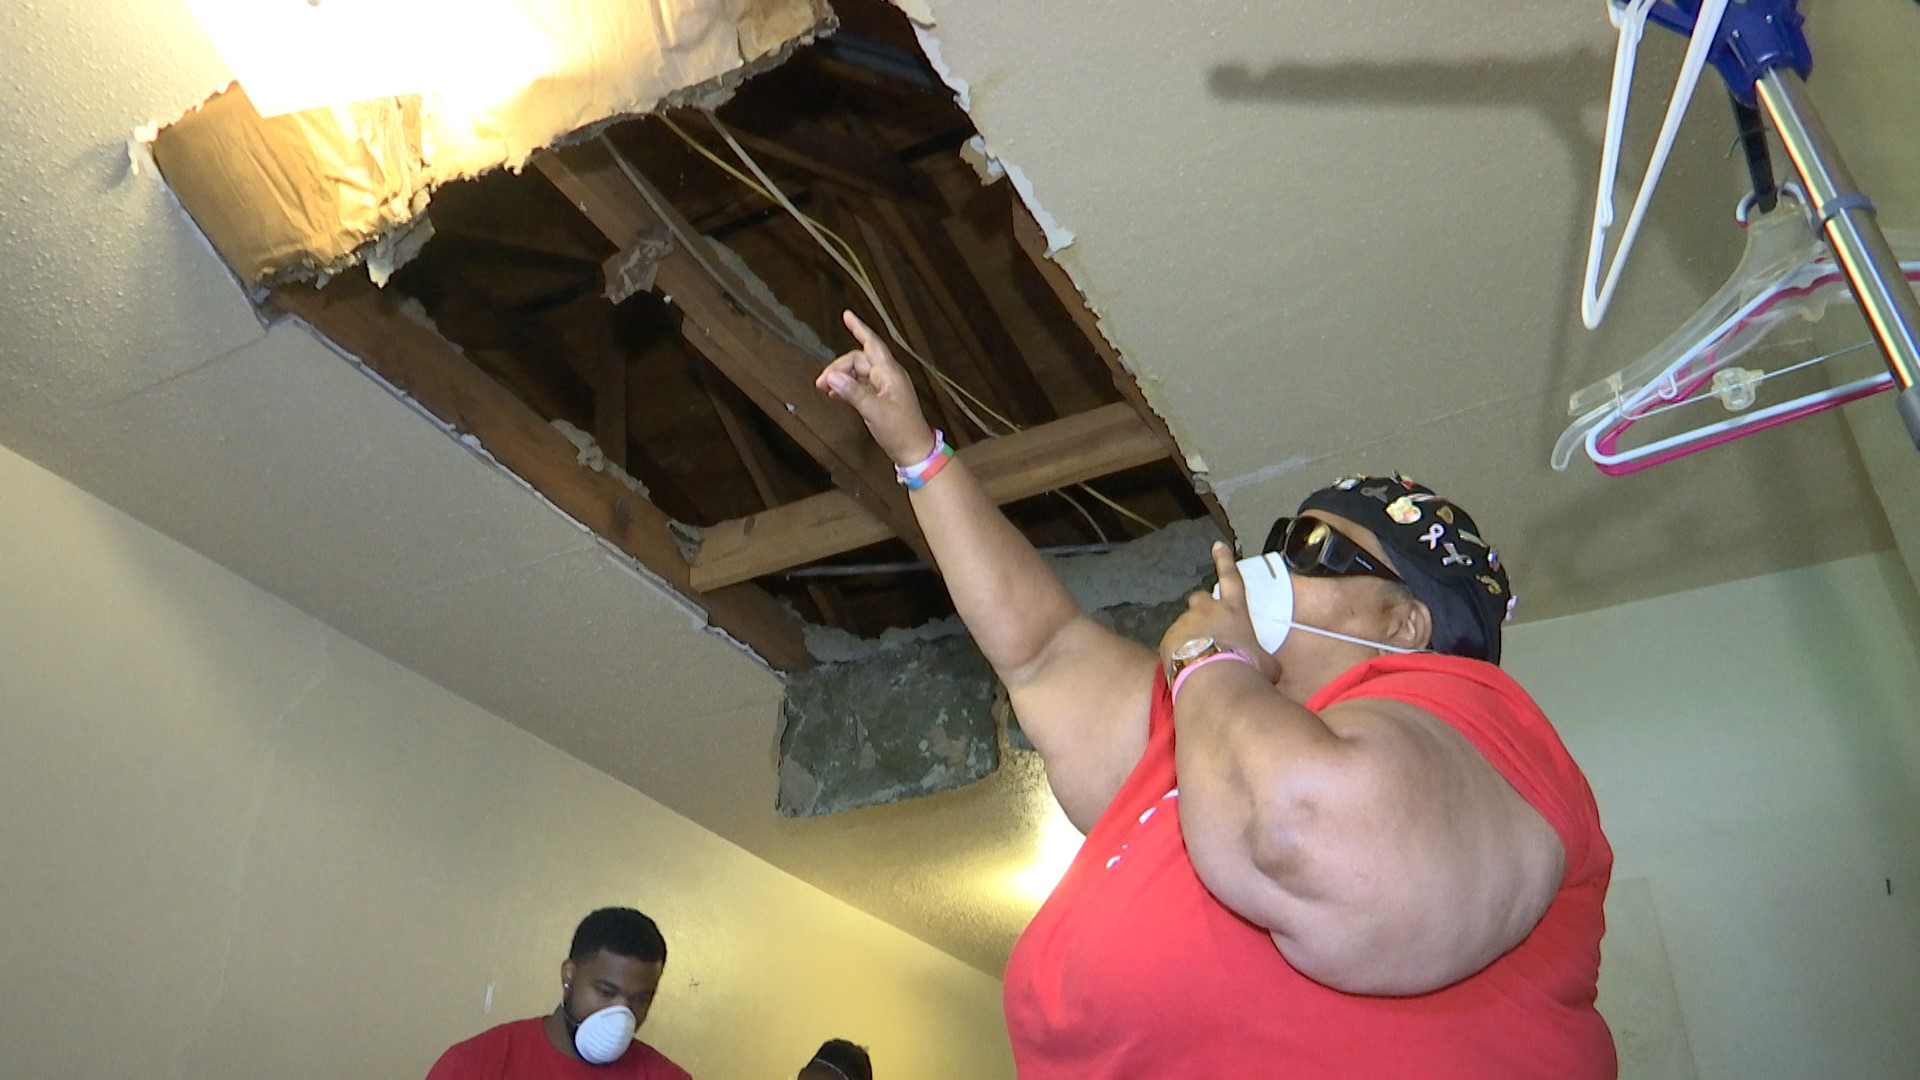 There's now a seven-foot hole in the ceiling of her public housing apartment in the Northwoods Community.